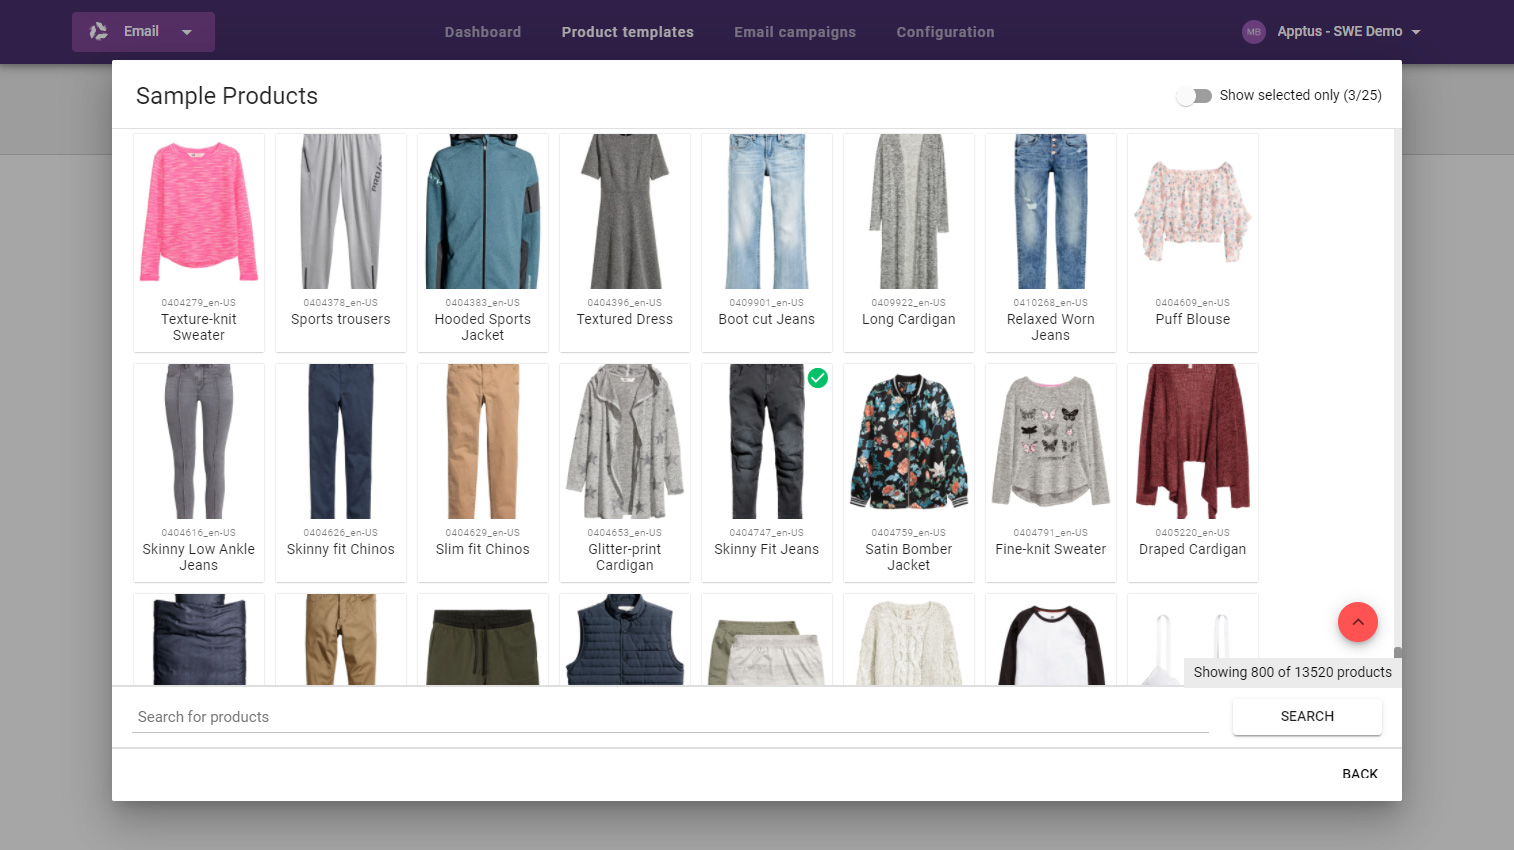 Email recommendations - Product templates - Select products